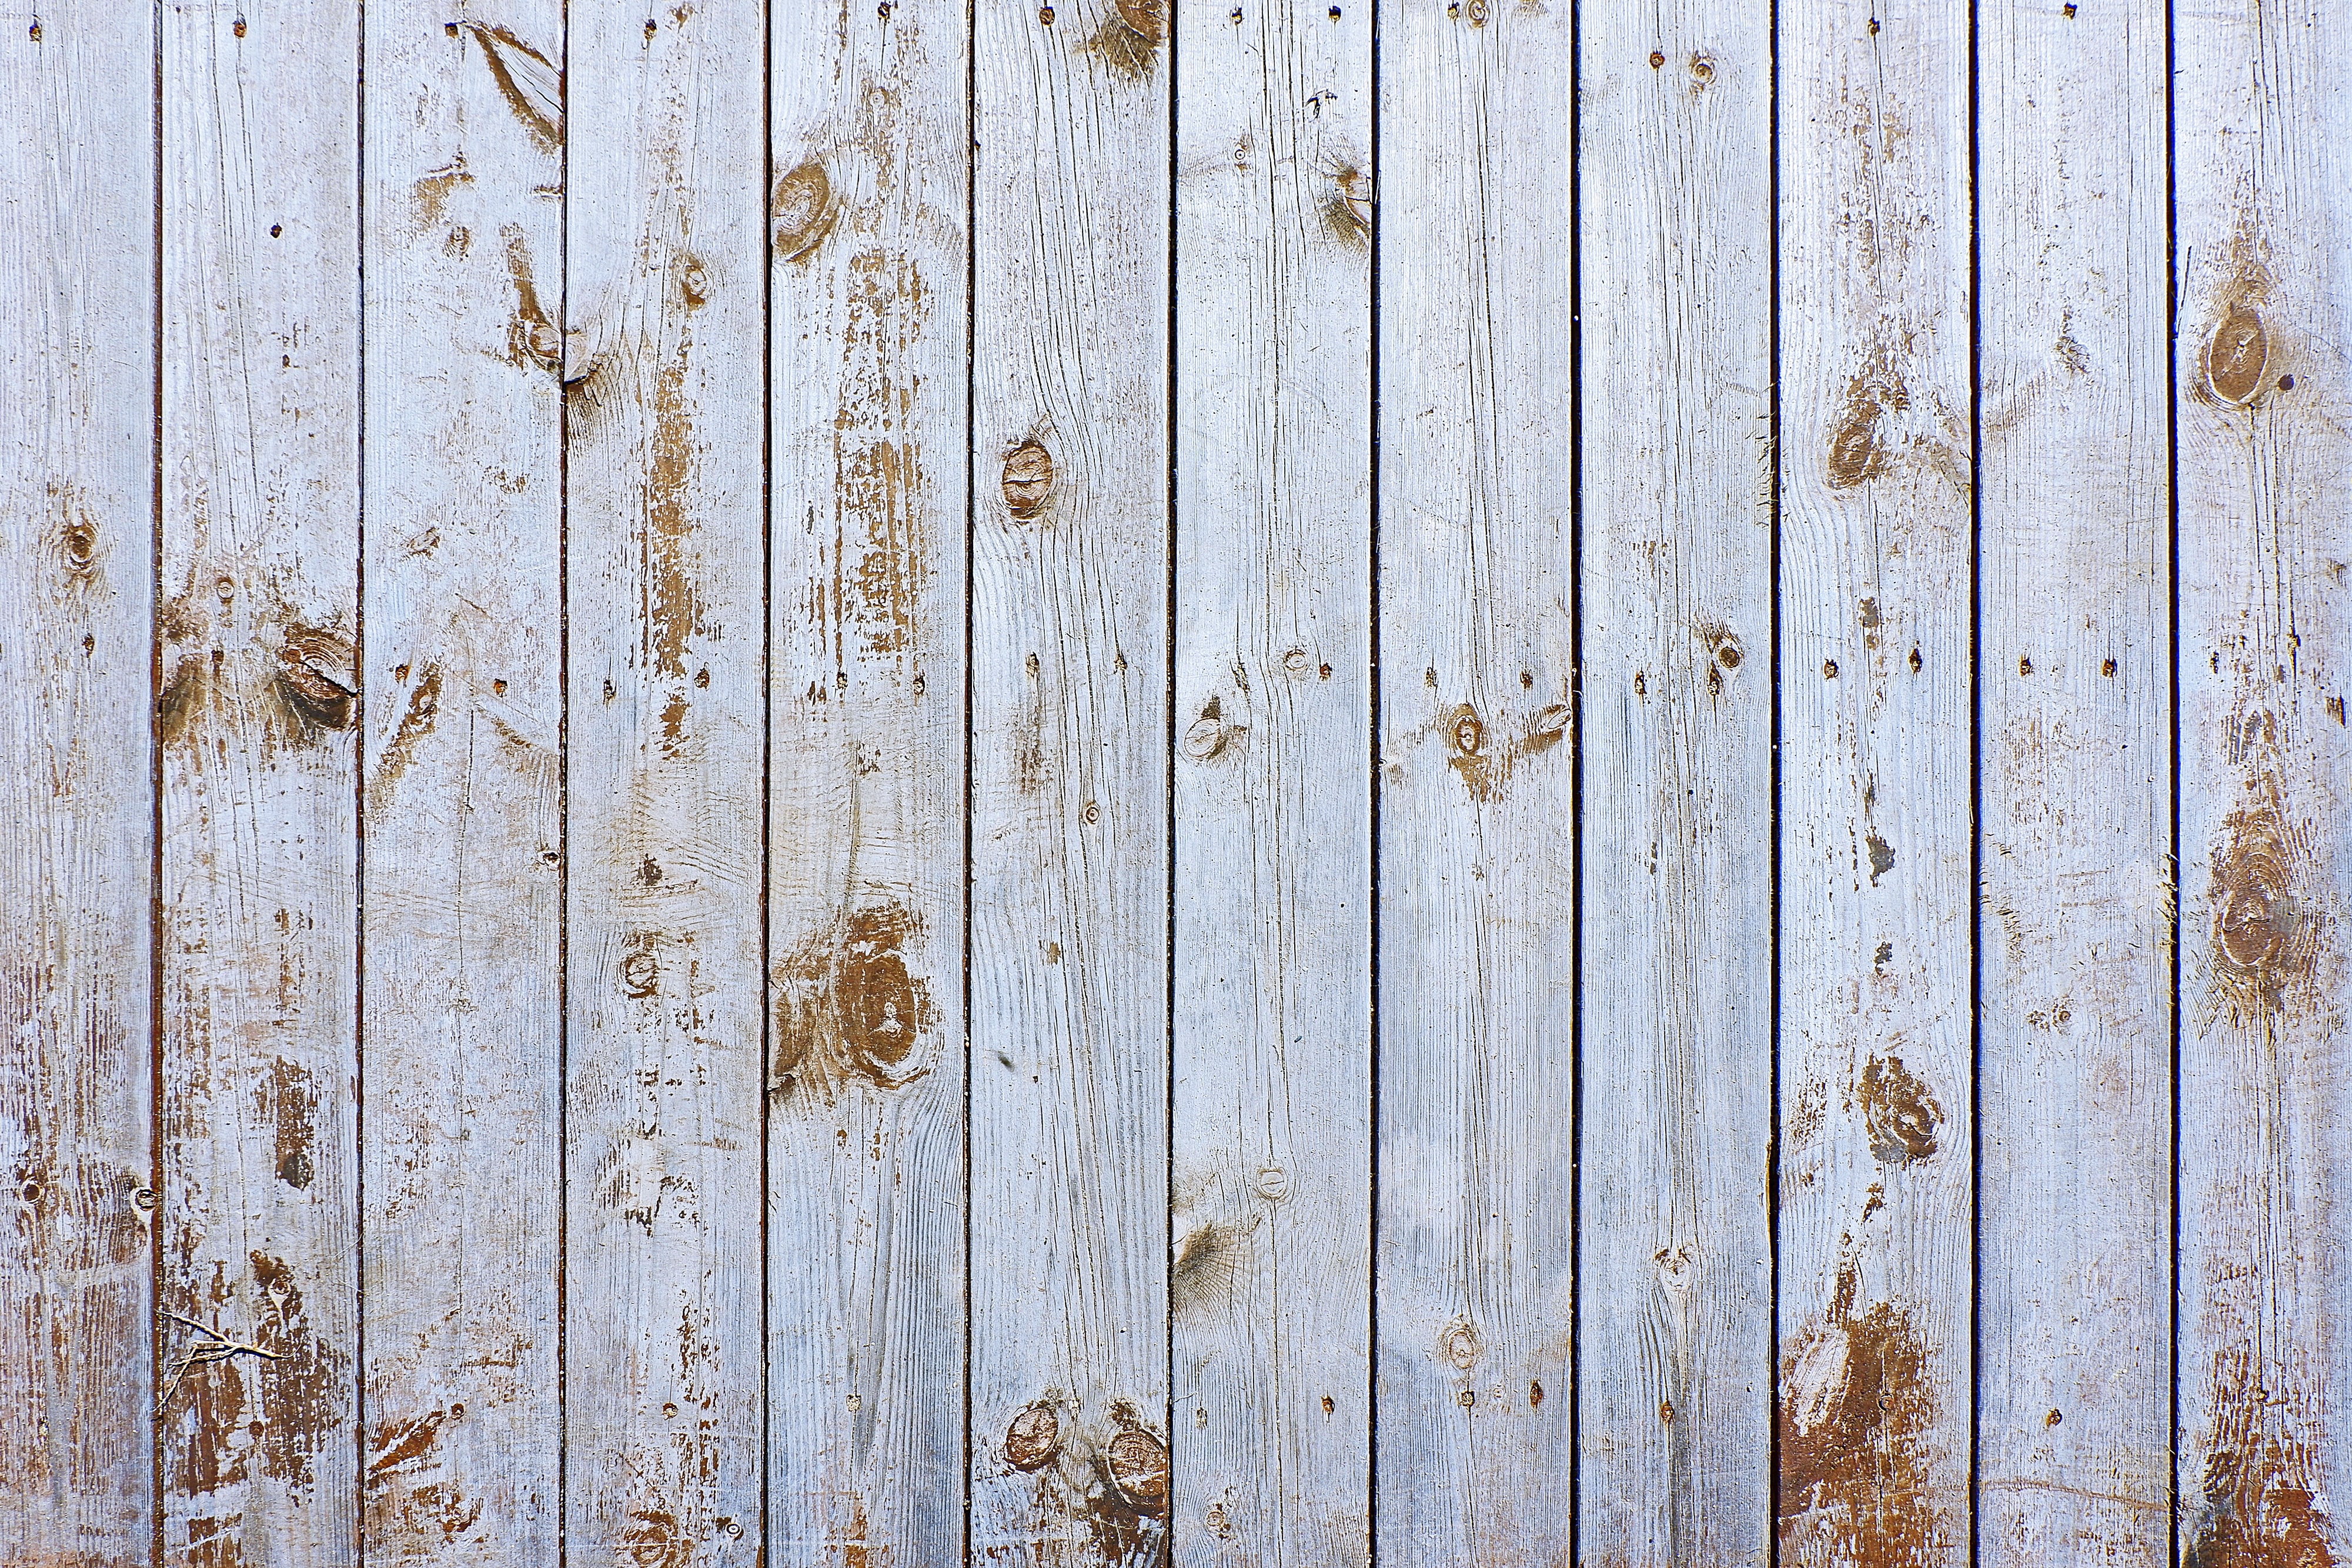 wood, wooden, texture, textures, surface, planks, board